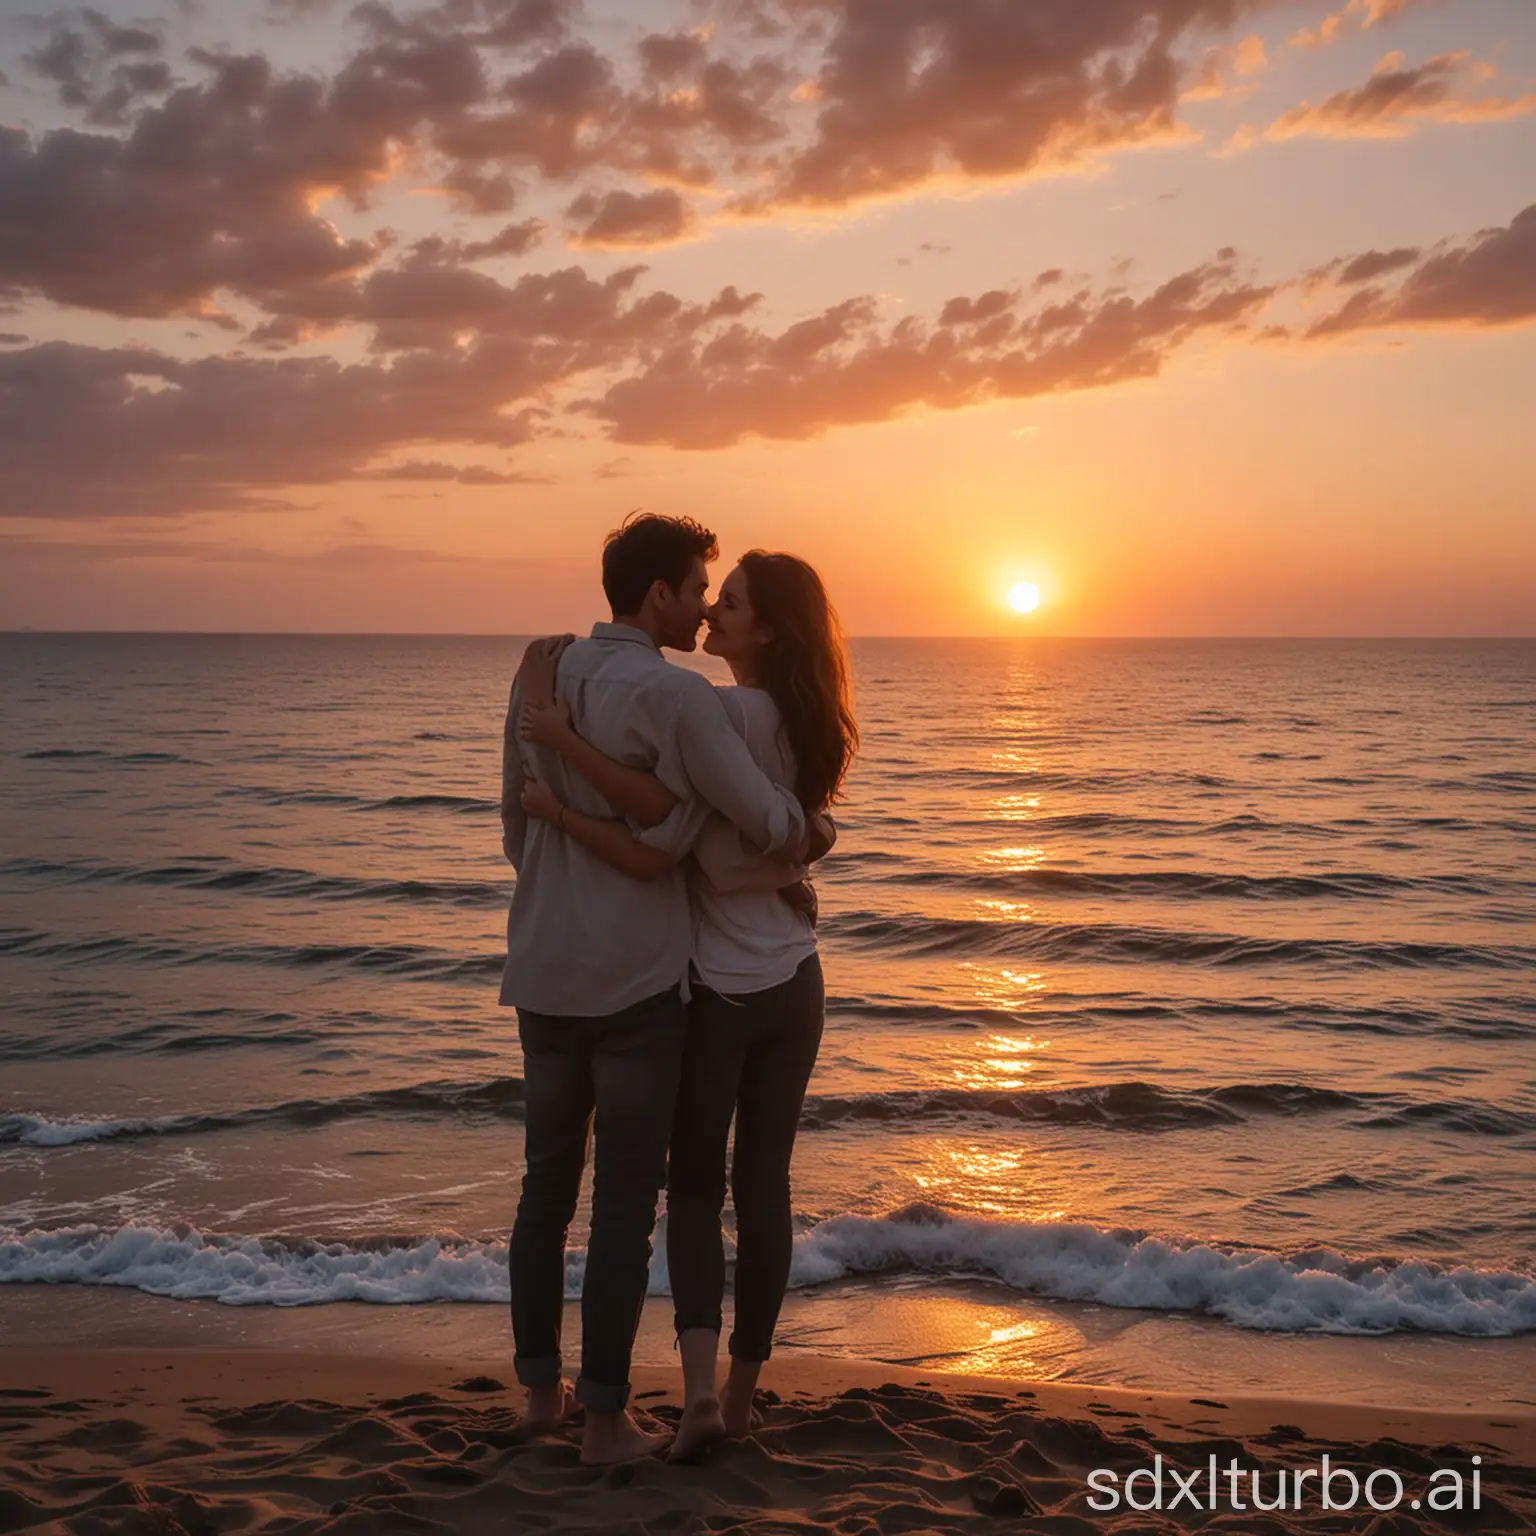 Affectionate lovers are watching the sunset over the sea, happily standing shoulder to shoulder and thinking about life and how beautiful their love is, smiling at each other.